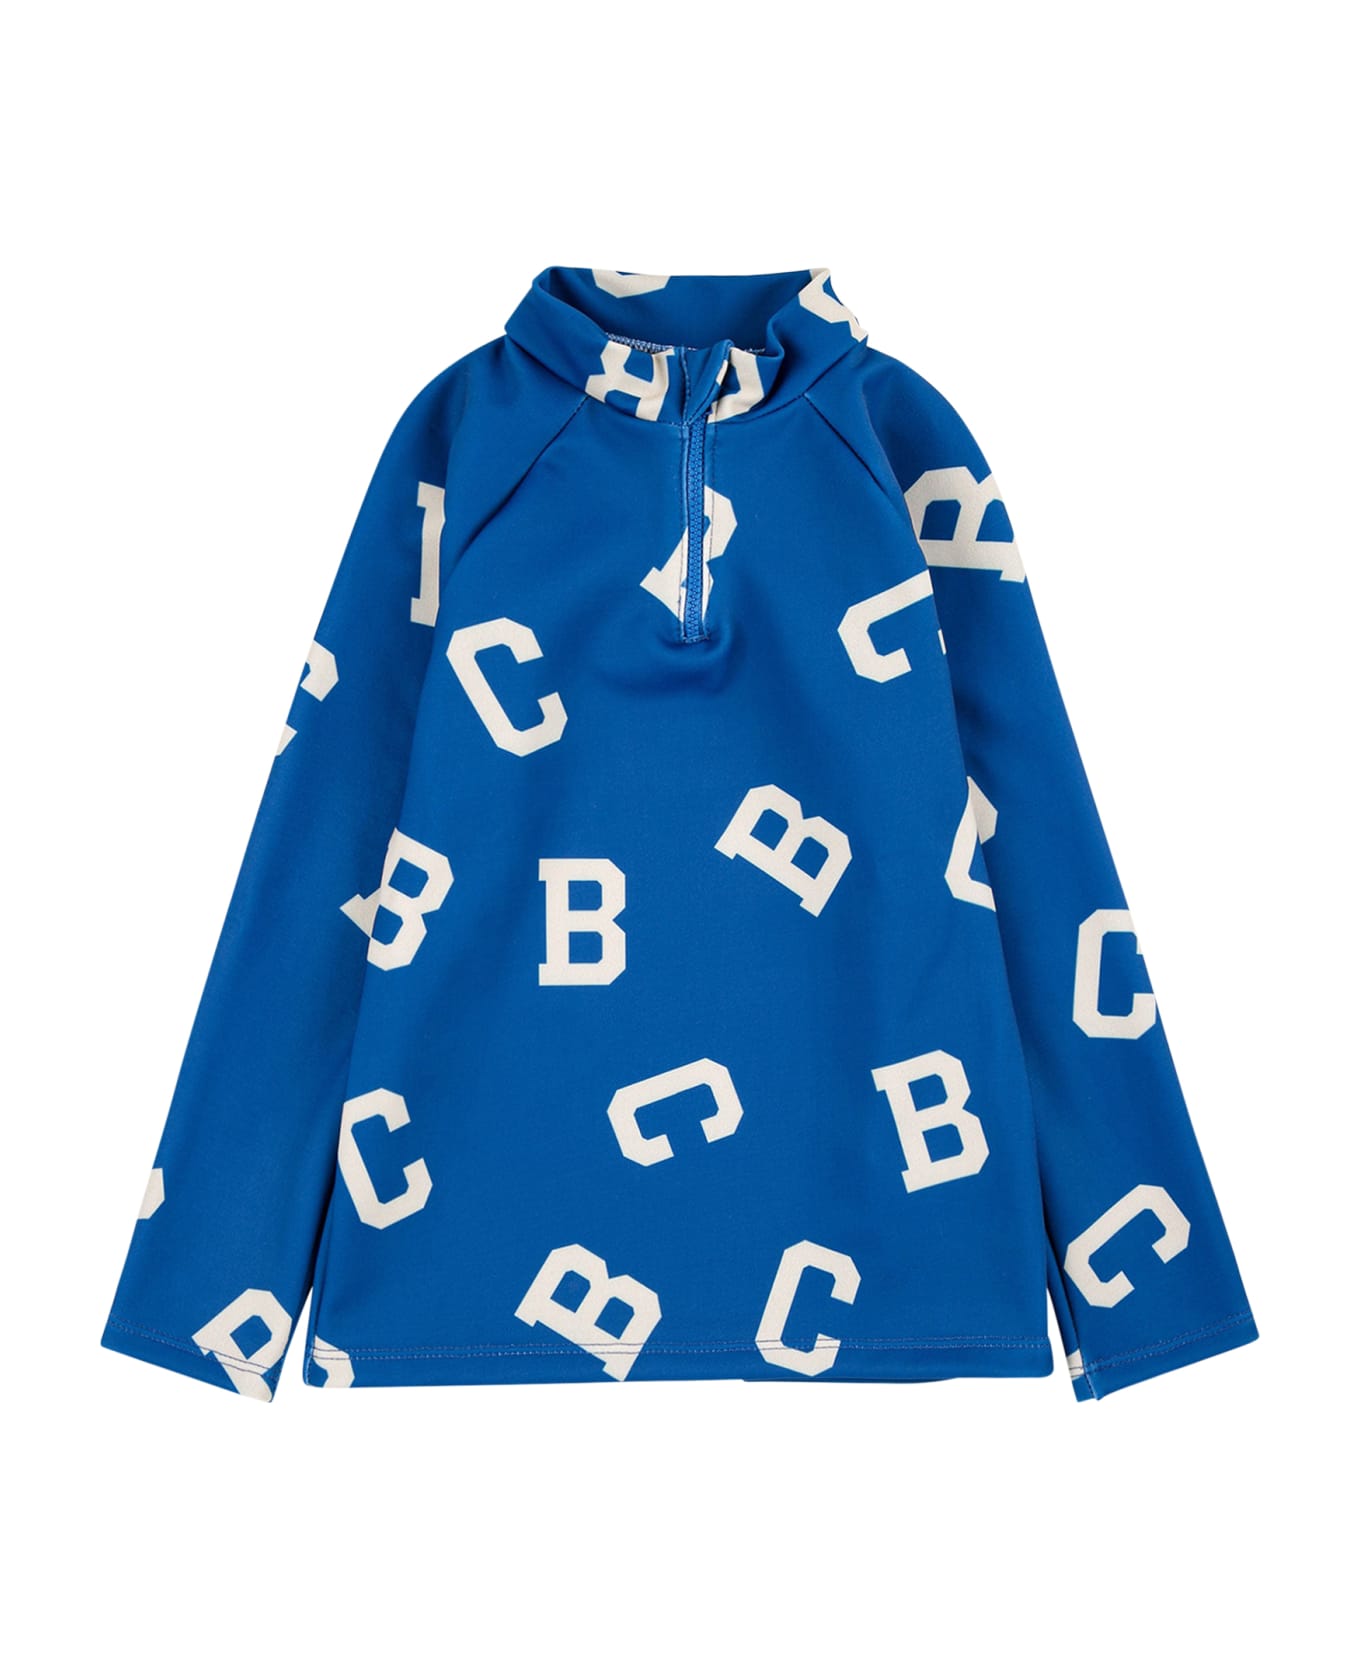 Bobo Choses Blue Turtleneck For Kids With Print - Blue トップス